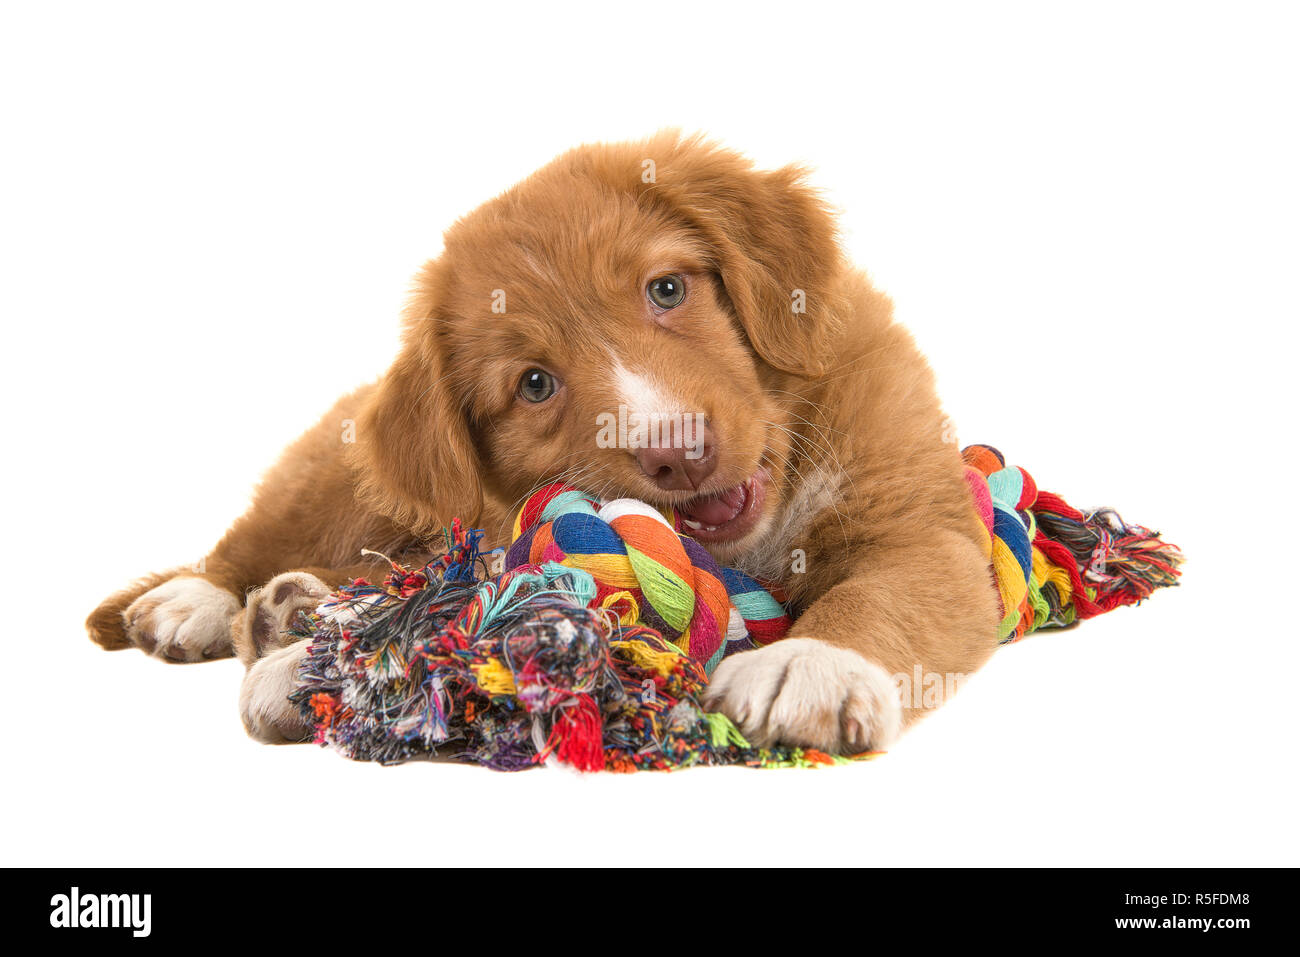 Cute nova scotia duck tolling retriever puppy seen from the front facing the camera lying on the floor chewing on a multicolored woven rope dog toy Stock Photo